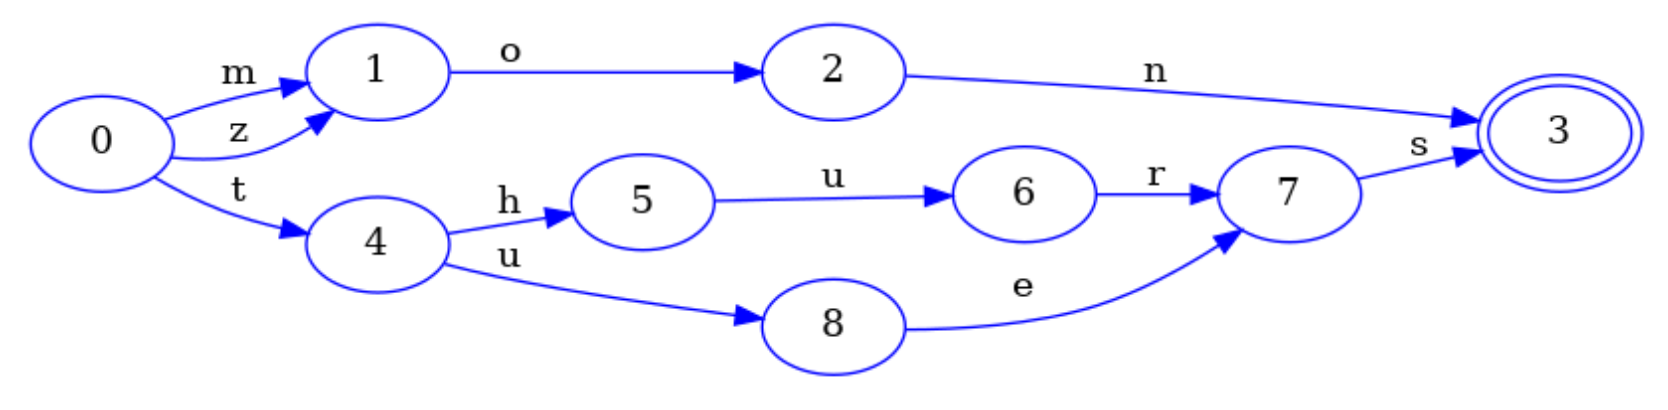 A DFA that accepts the same words as the prefix trie, but using fewer nodes